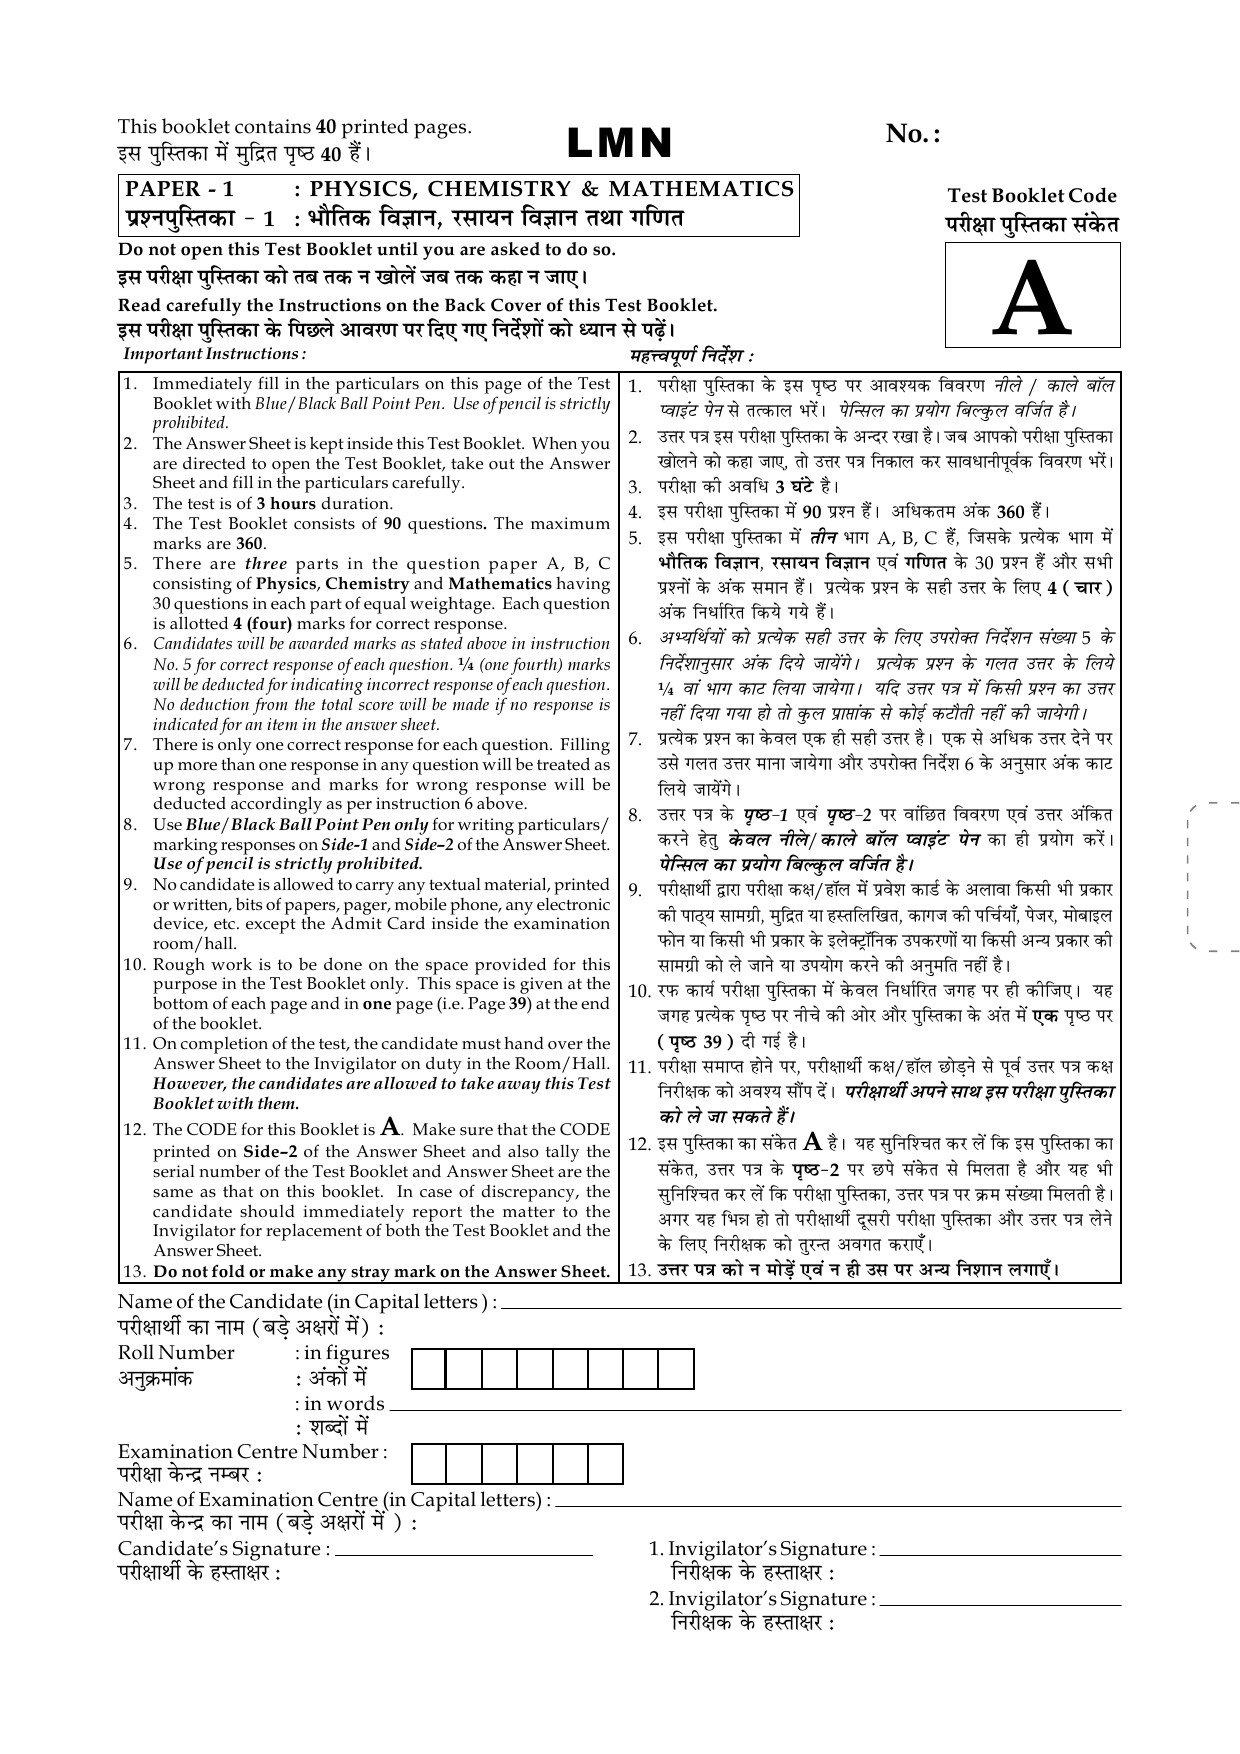 JEE Main Exam Question Paper 2015 Booklet A 1